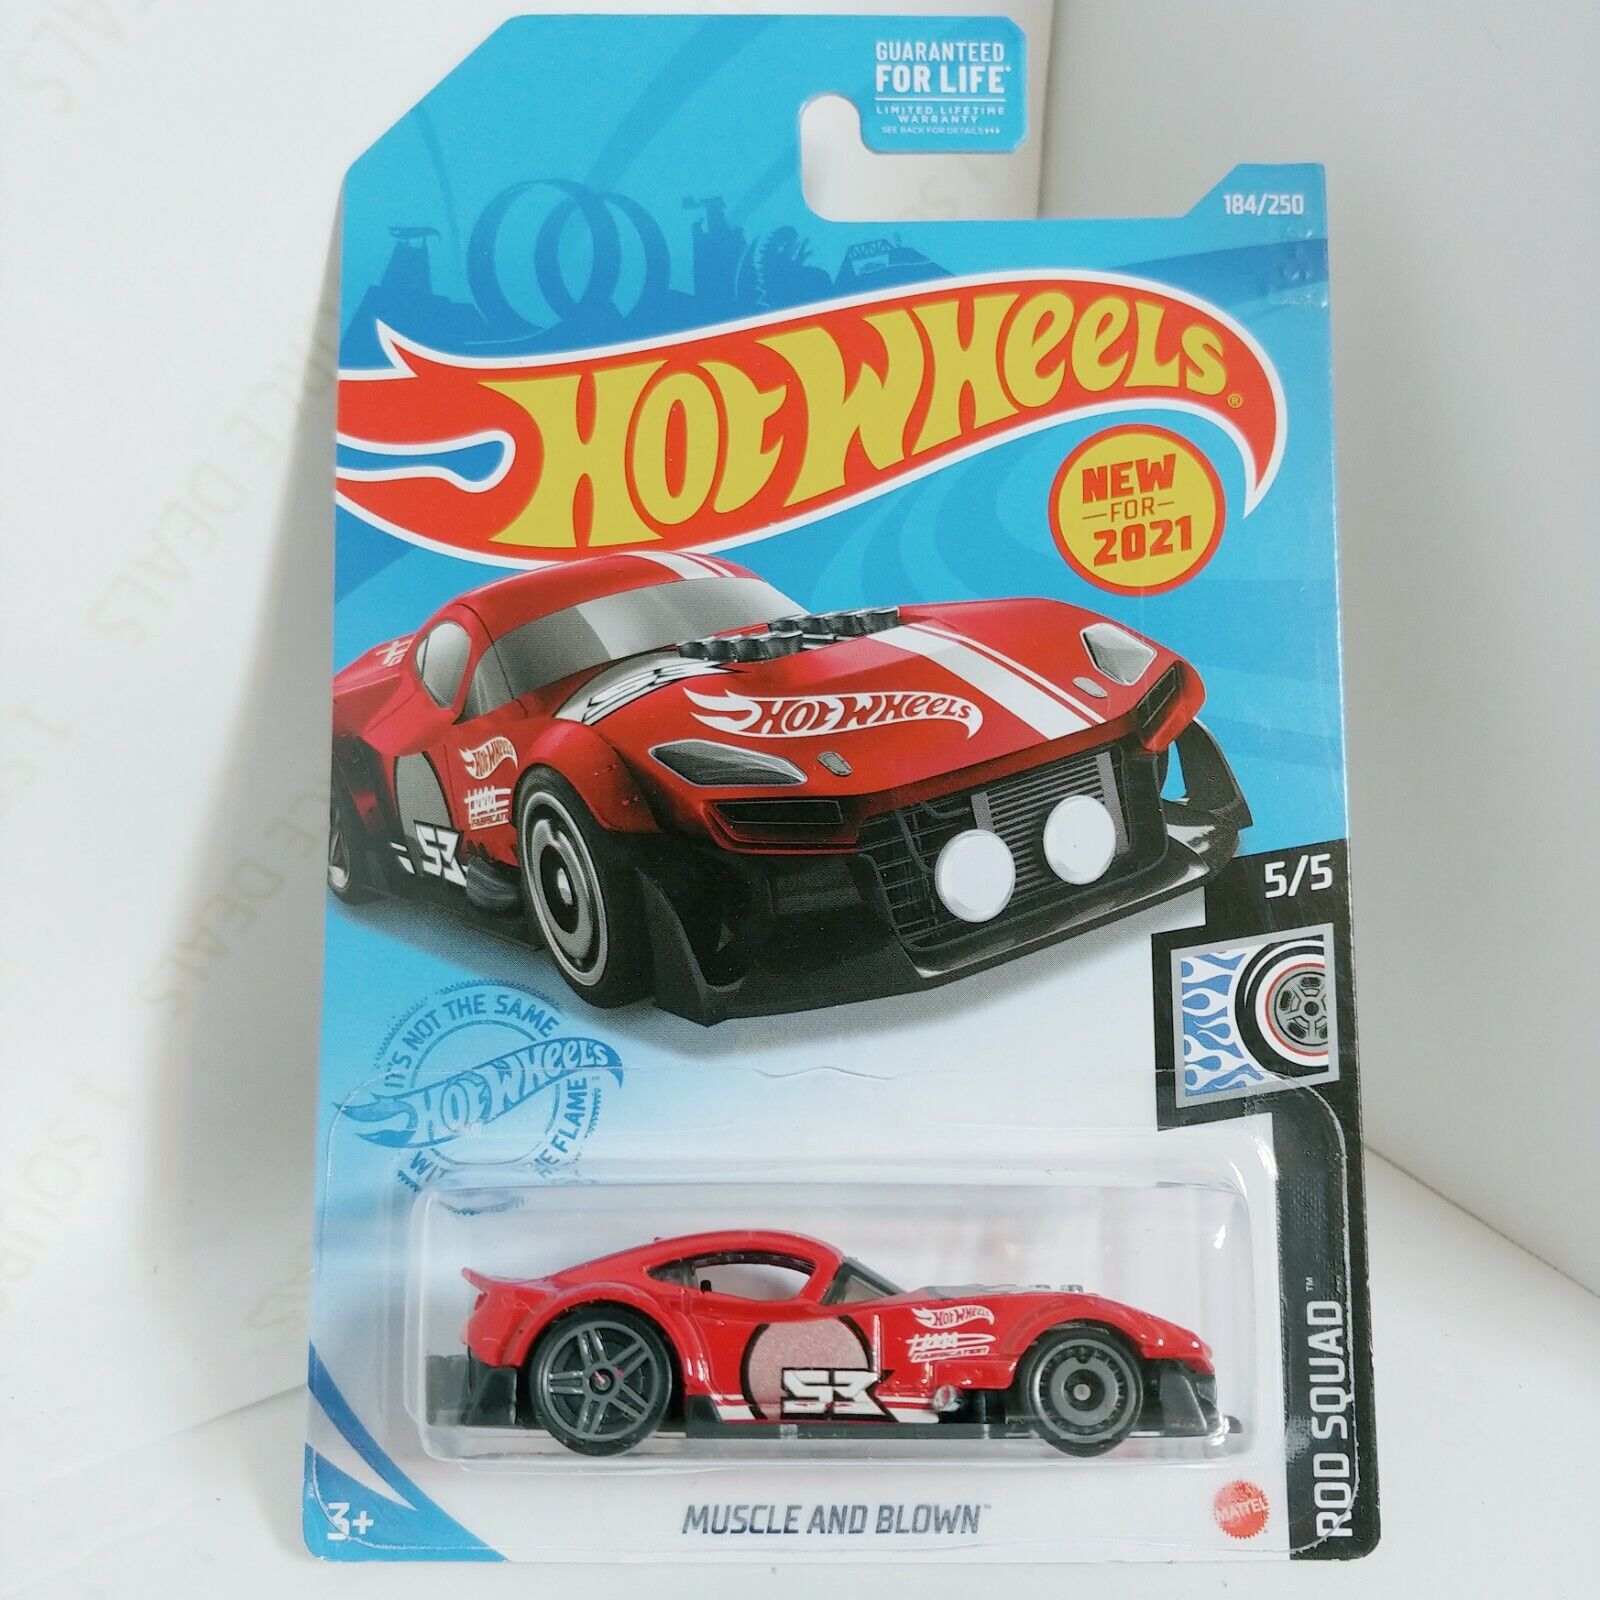 Make:#184 Muscle and Blown (Red) 5/5 Rod Squad:2021 Hot Wheels Cars Main Line Series Newest Cases You Pick Brand New Hot Wheels